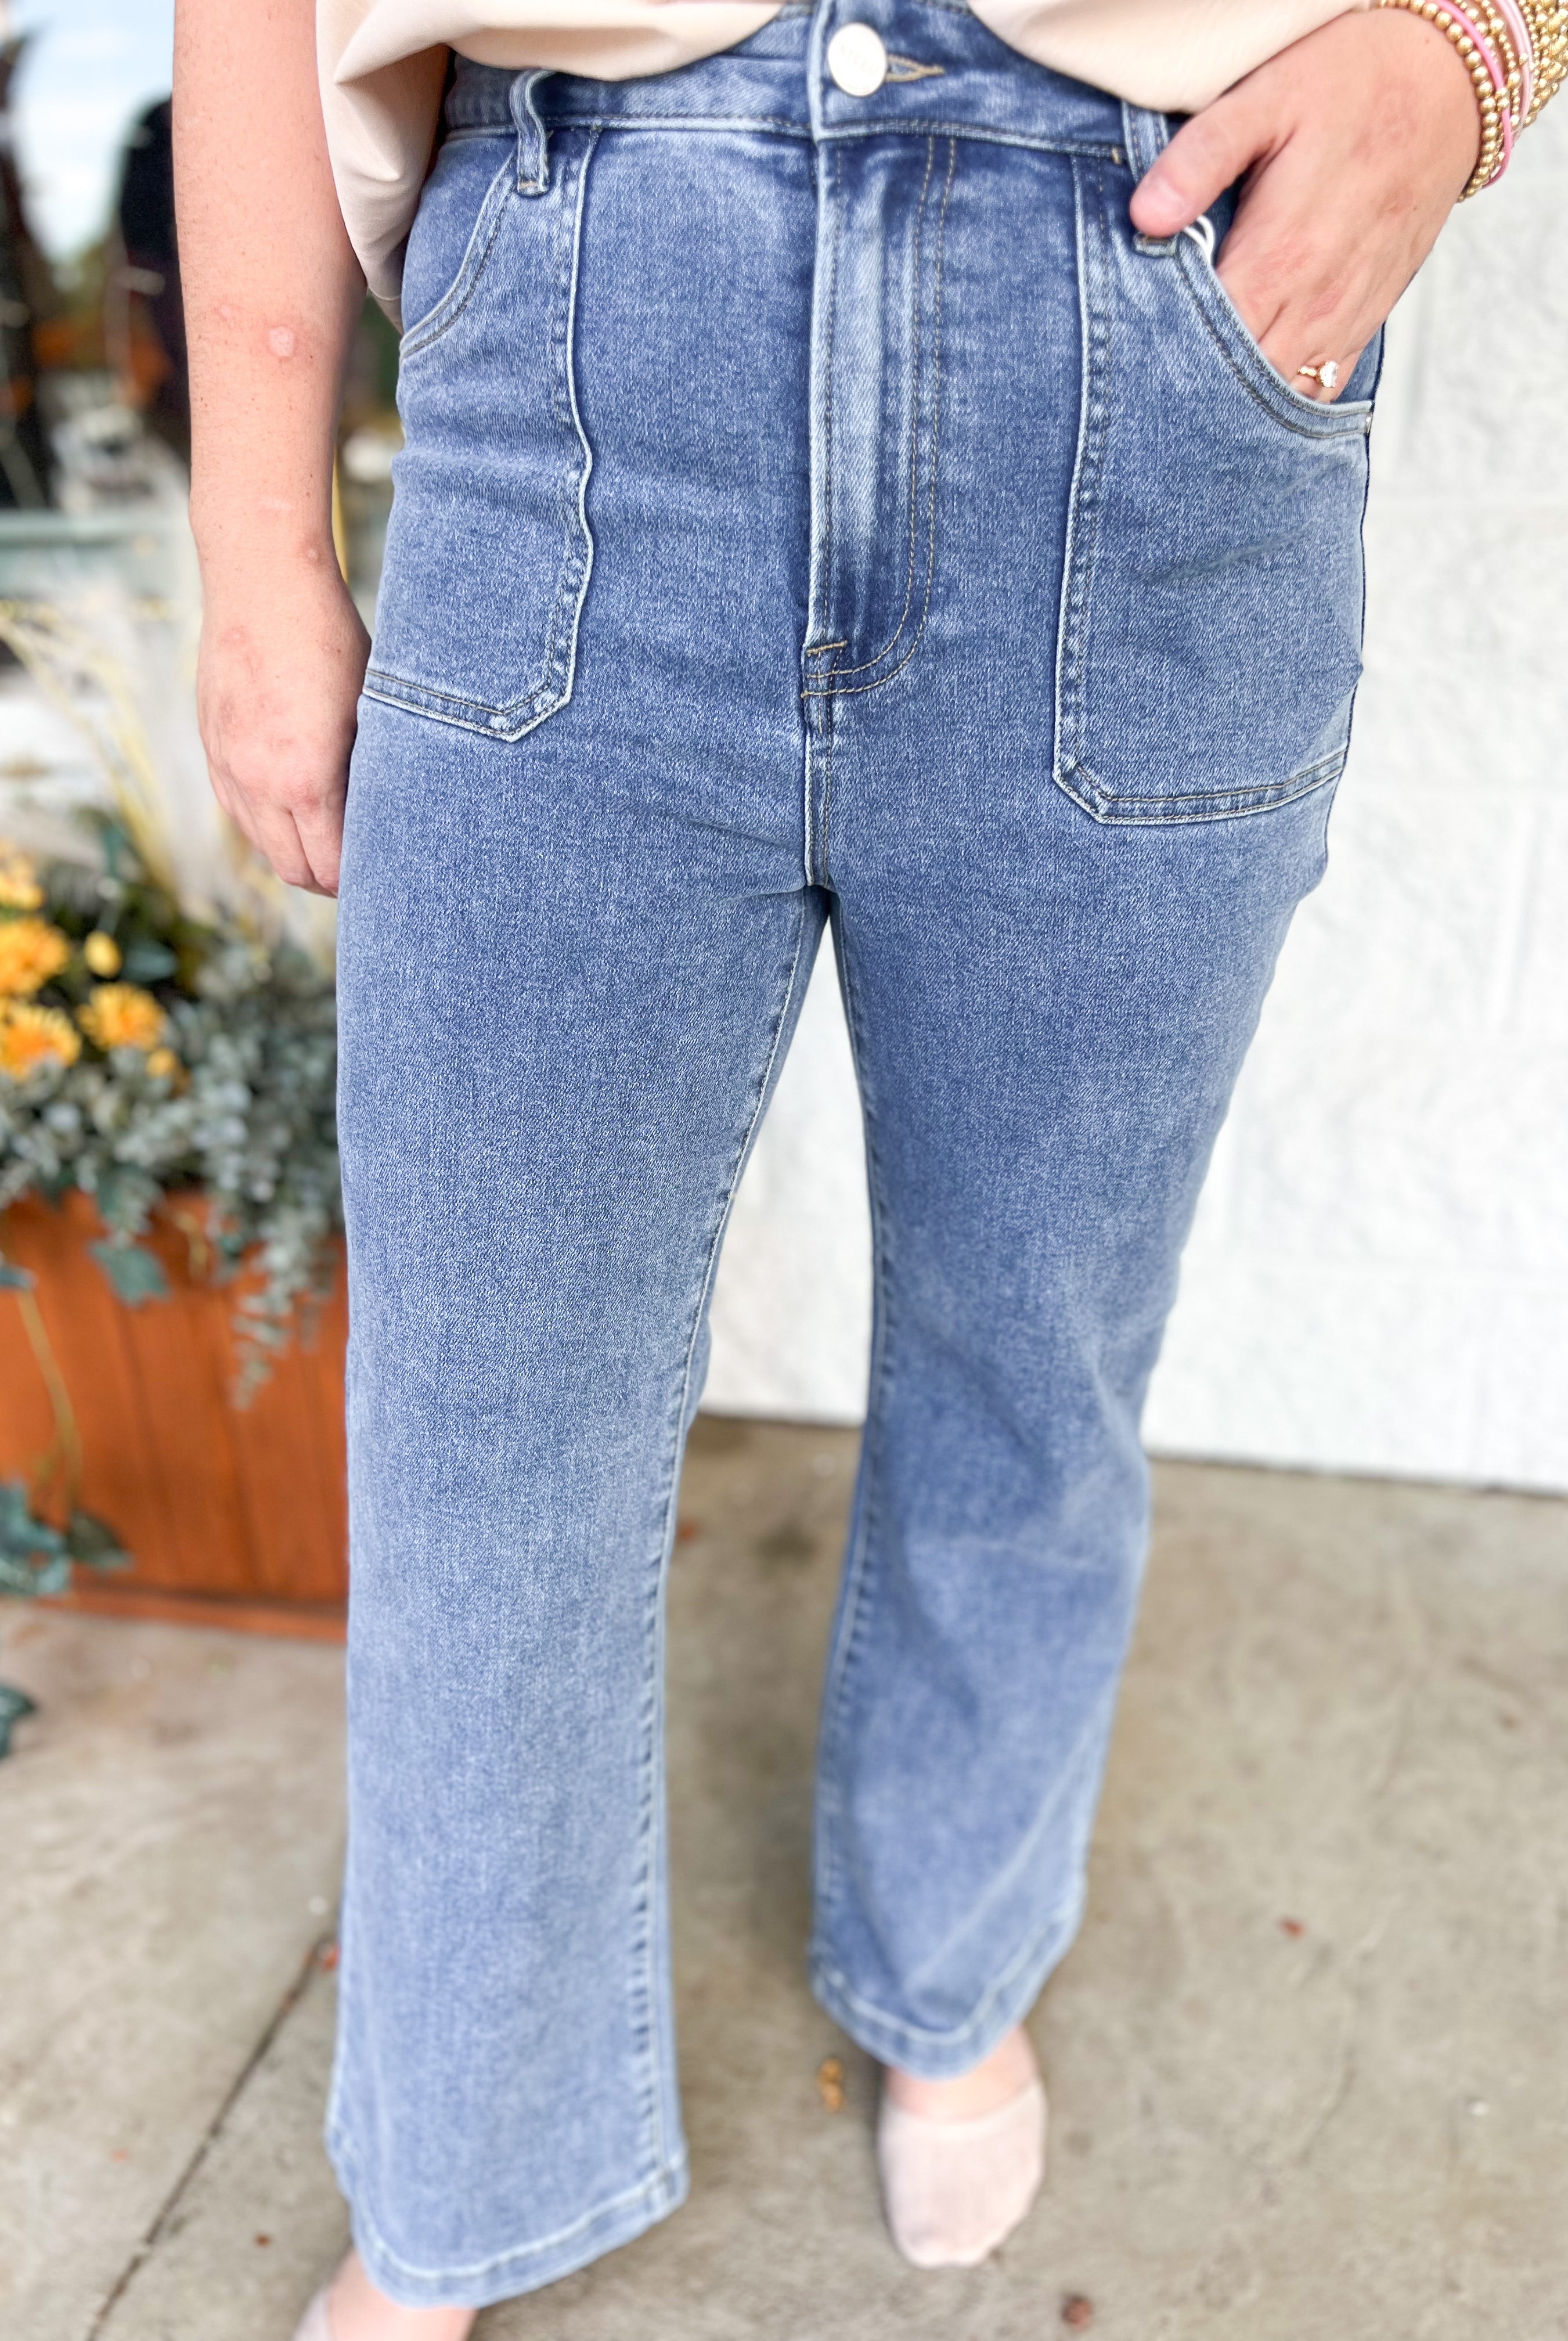 Trouser Style High Rise Risen Jean-Jeans-Risen-The Lovely Closet, Women's Fashion Boutique in Alexandria, KY